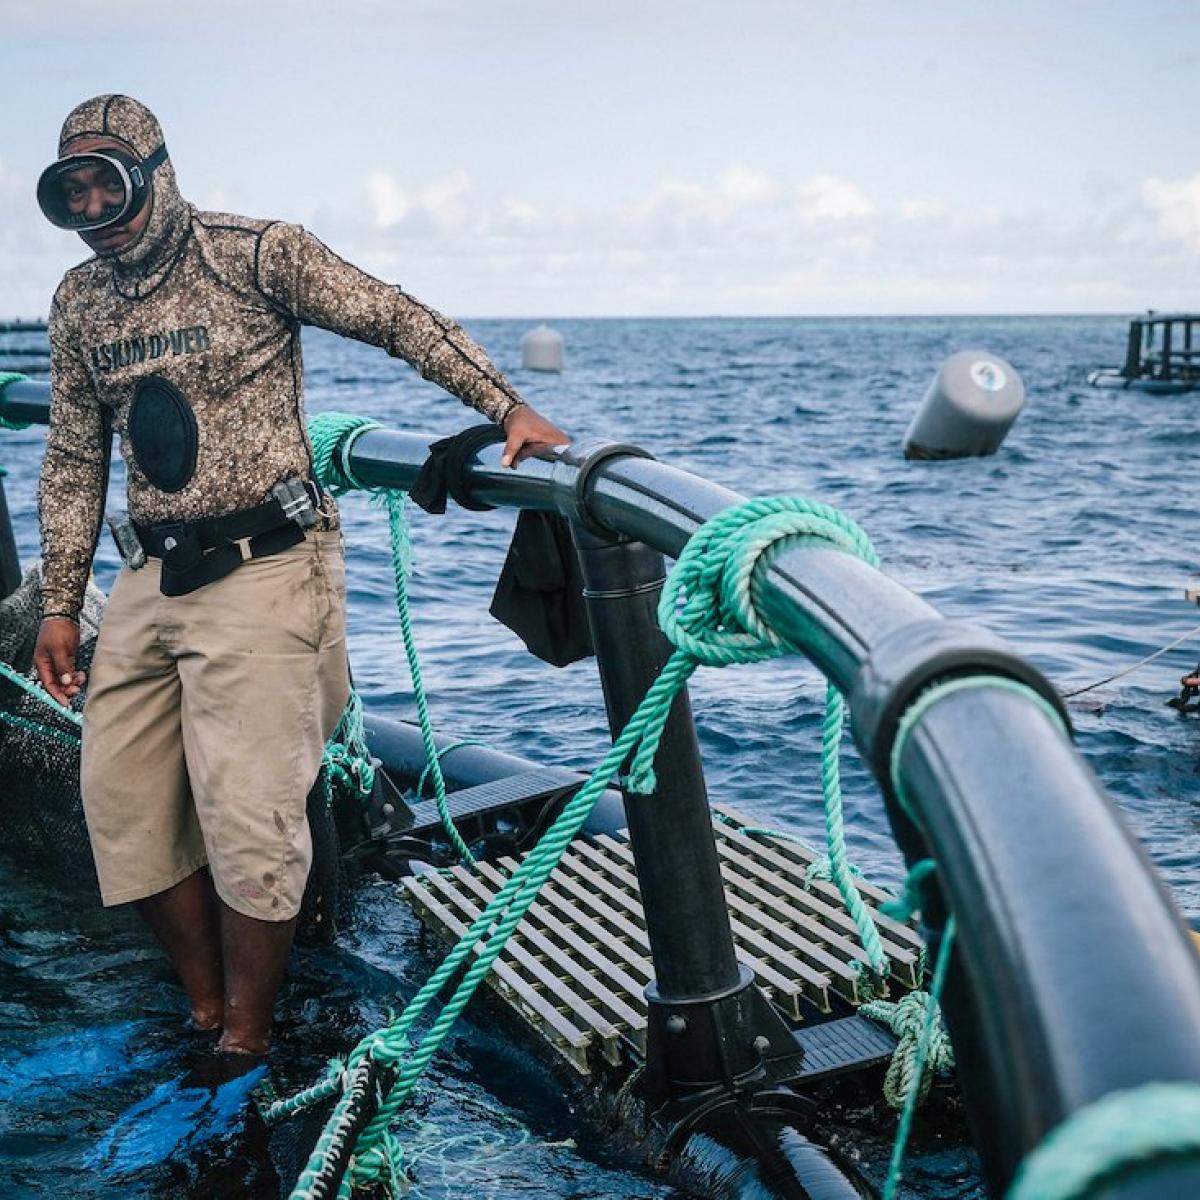 In 2015, USAID partnered with Aquaculture Technologies of the Marshall Islands to help the company produce more fish and become self-sufficient. USAID’s $1.7 million grant allowed the company to purchase a feed mill machine to manufacture its own fish feed.